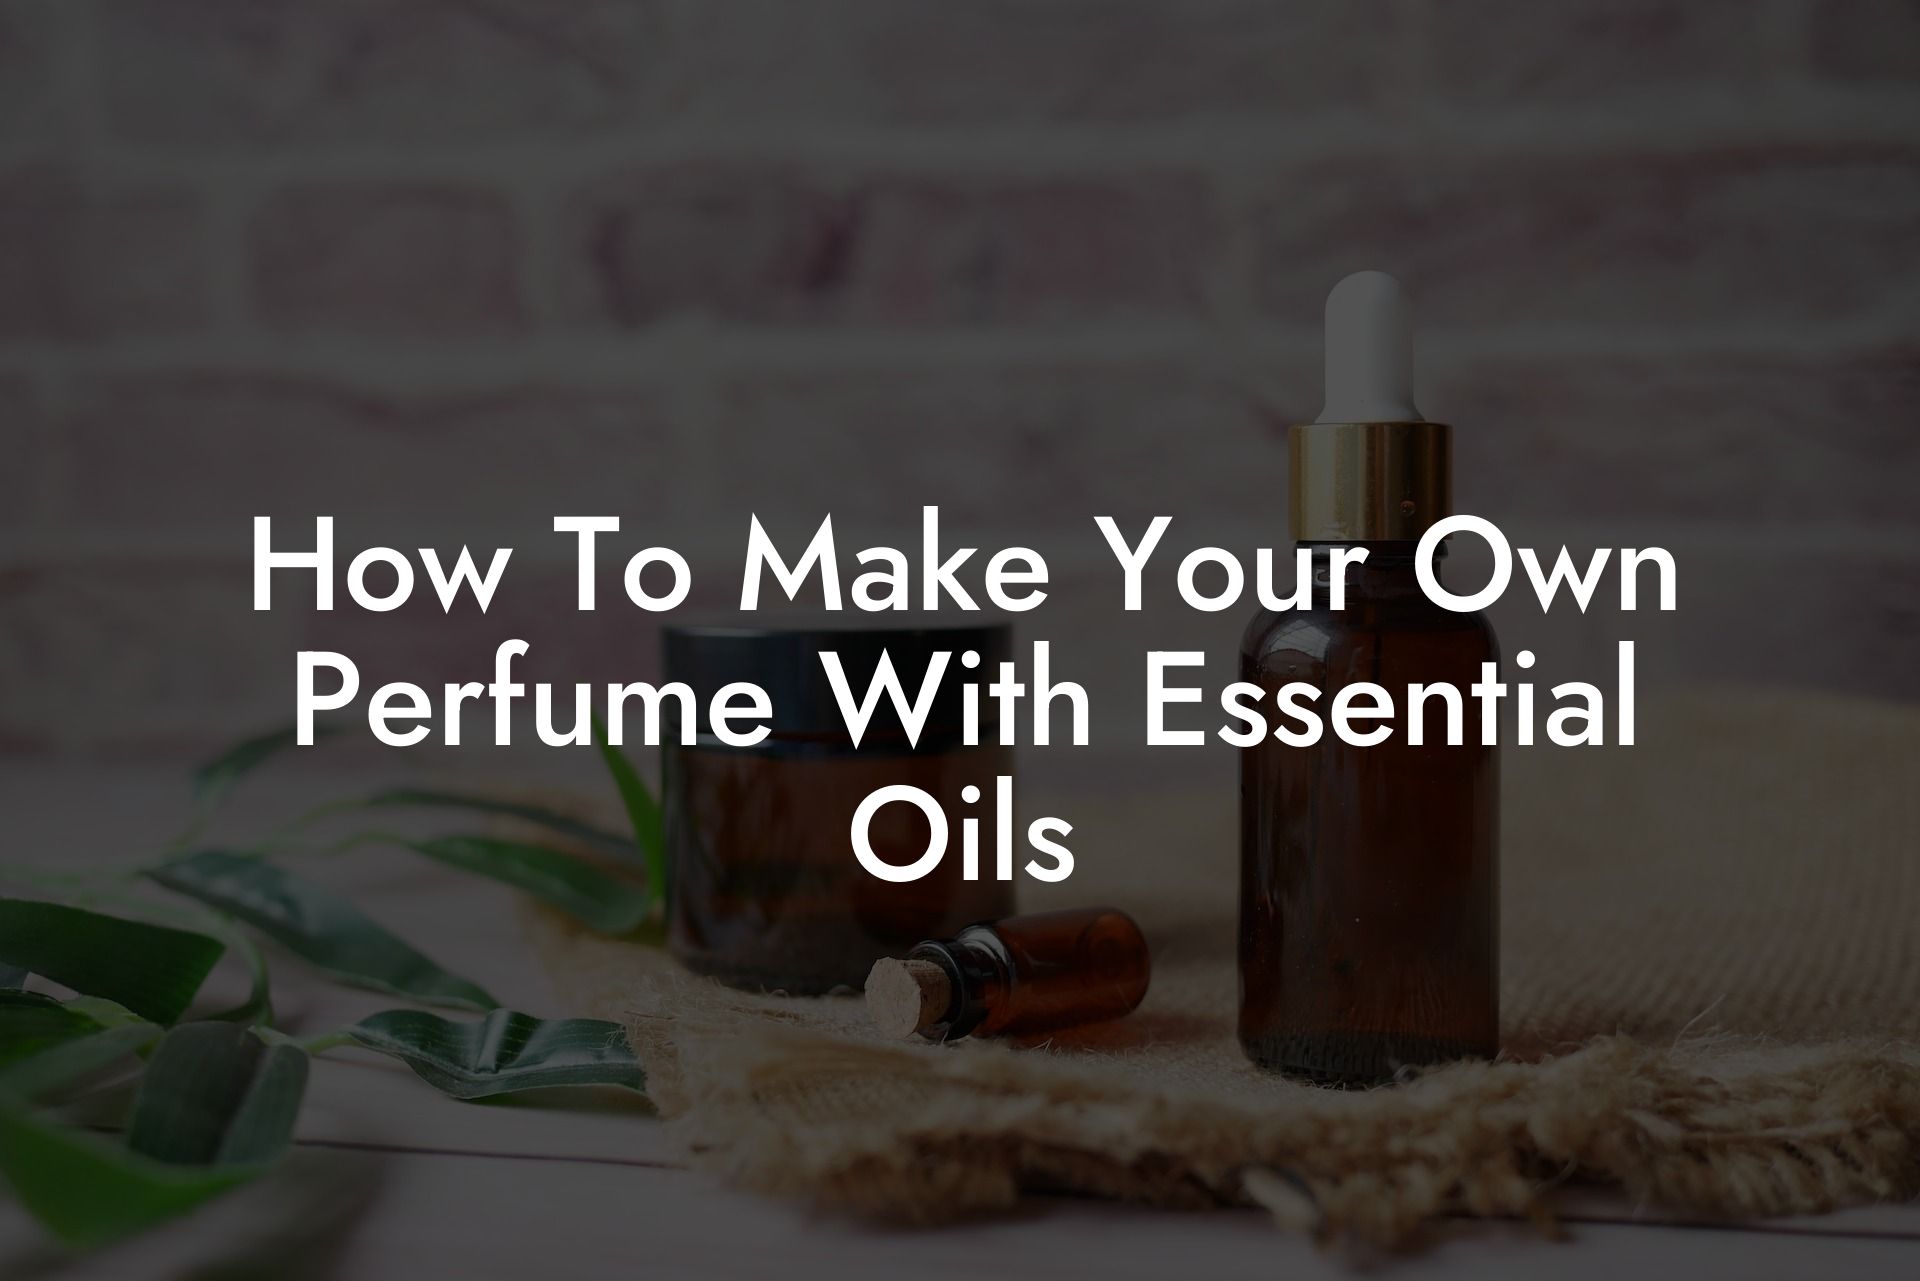 How To Make Your Own Perfume With Essential Oils